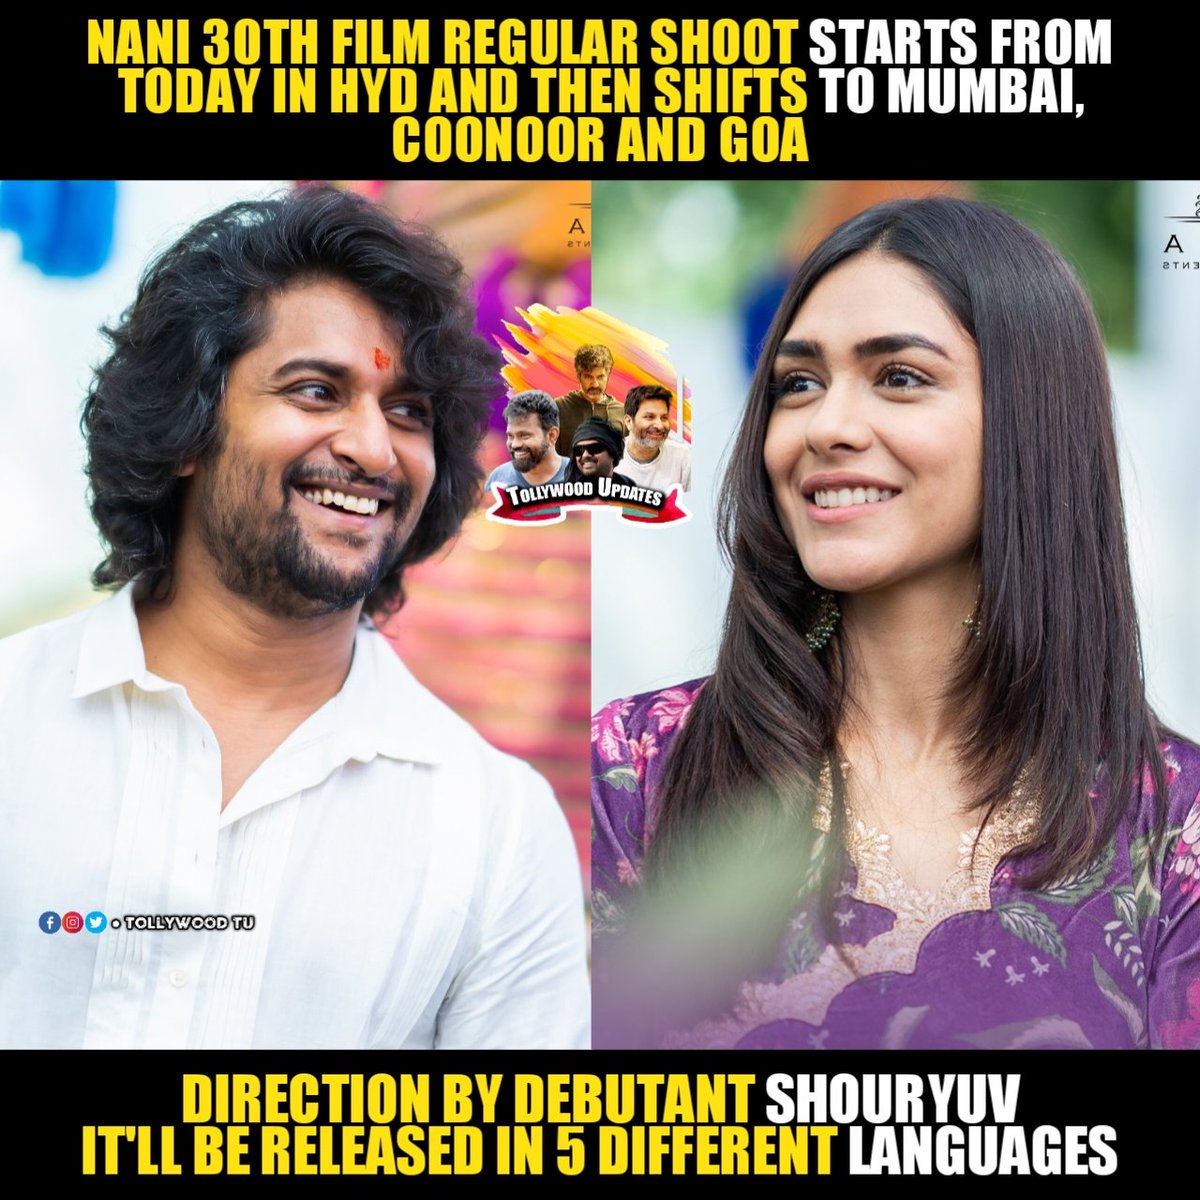 #Nani30 regular shoot started today in Hyd. 
#KiaraKhanna playing the daughter role in this film.

#Nani #MrunalThakur